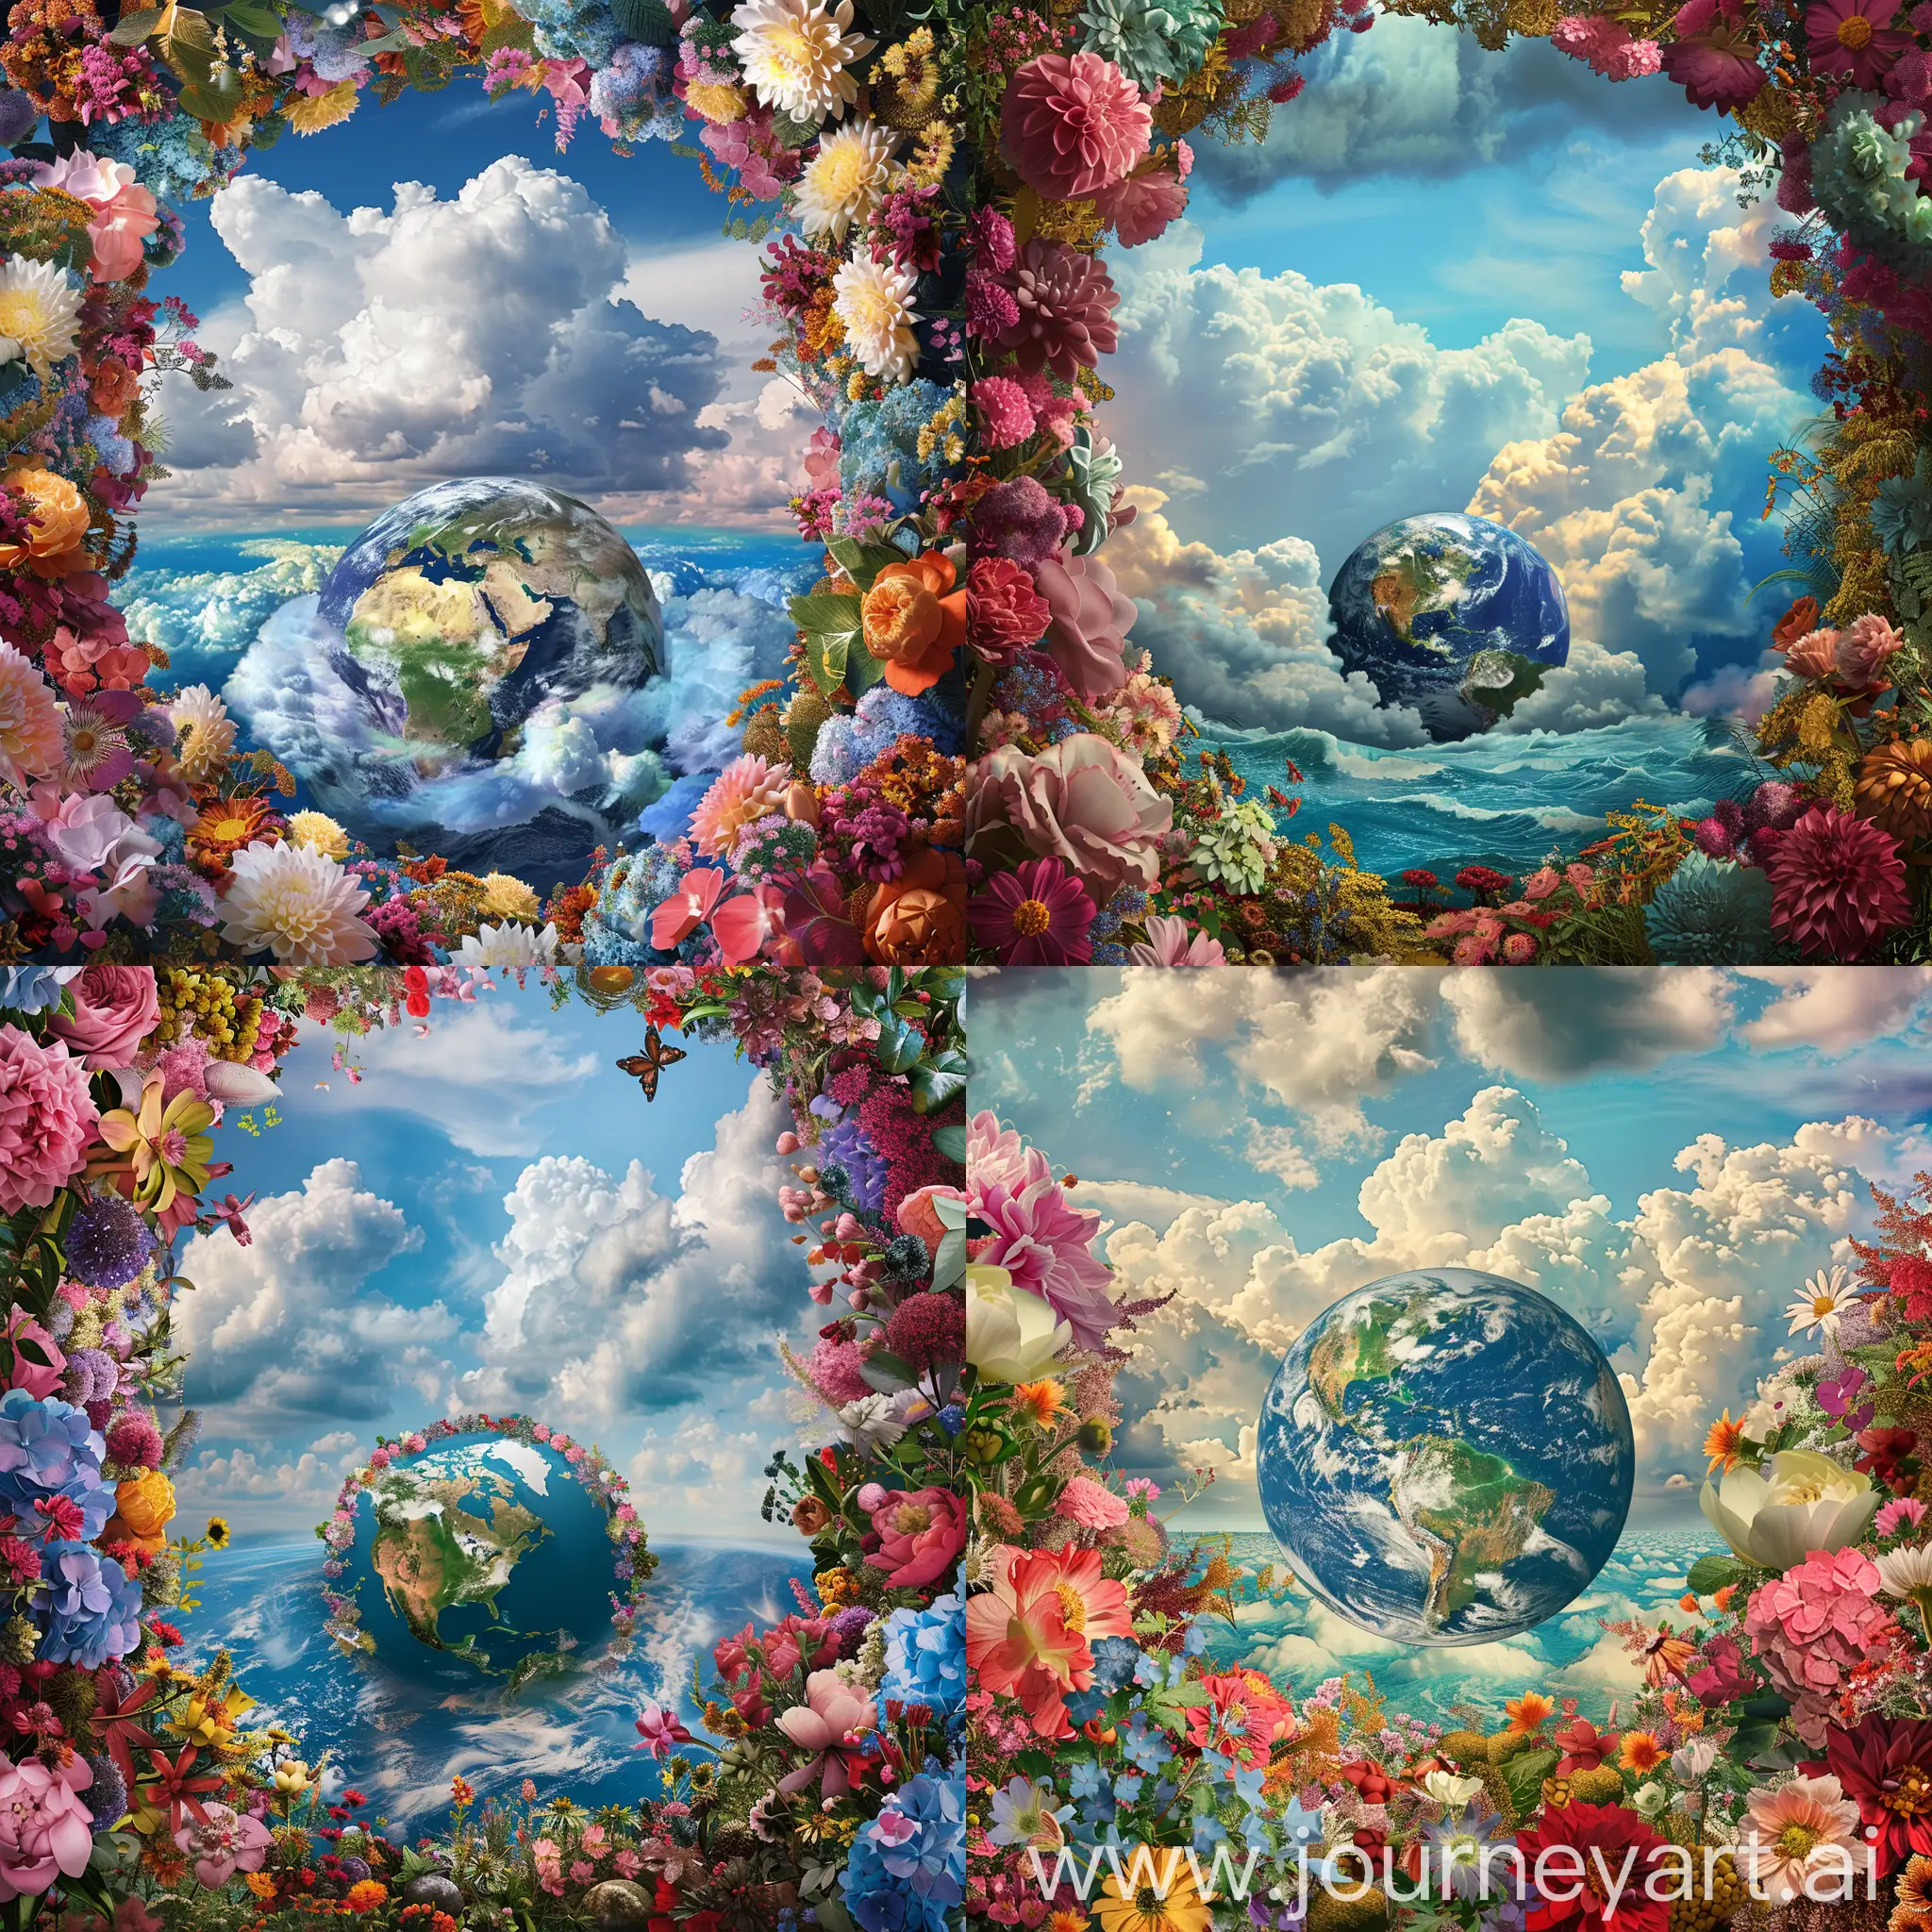 Earth-Surrounded-by-Vibrant-Flowers-Seas-and-Land-Under-a-Heavenly-Blue-Sky